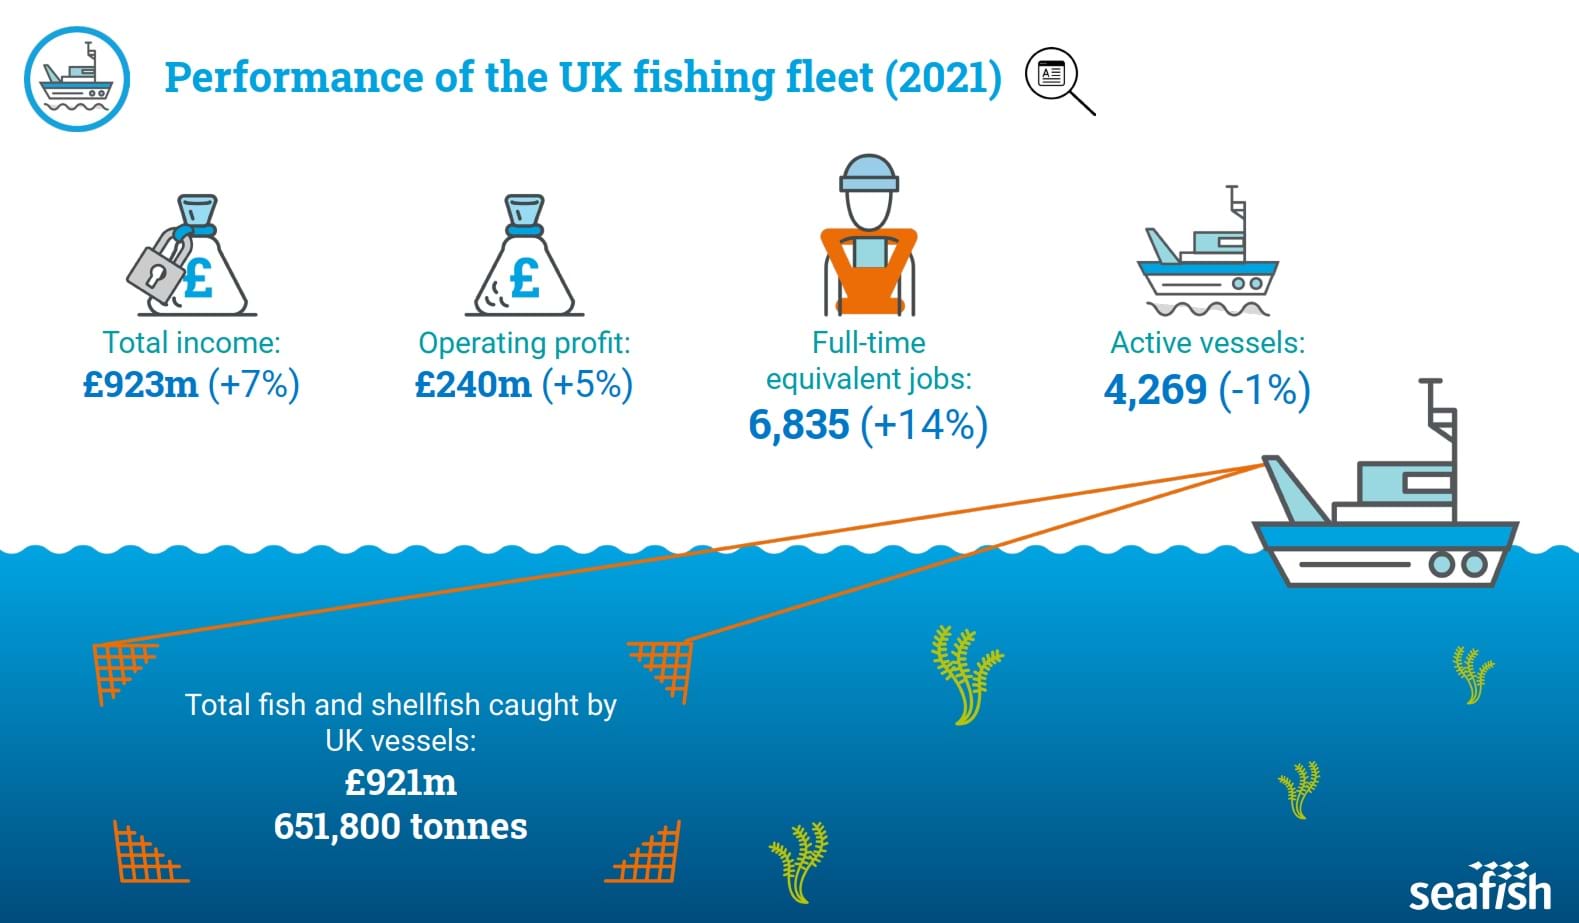 Infographic showing the performance of the UK fishing fleet (2021) by total income, operating profit, full-time equivalent jobs and active vessels